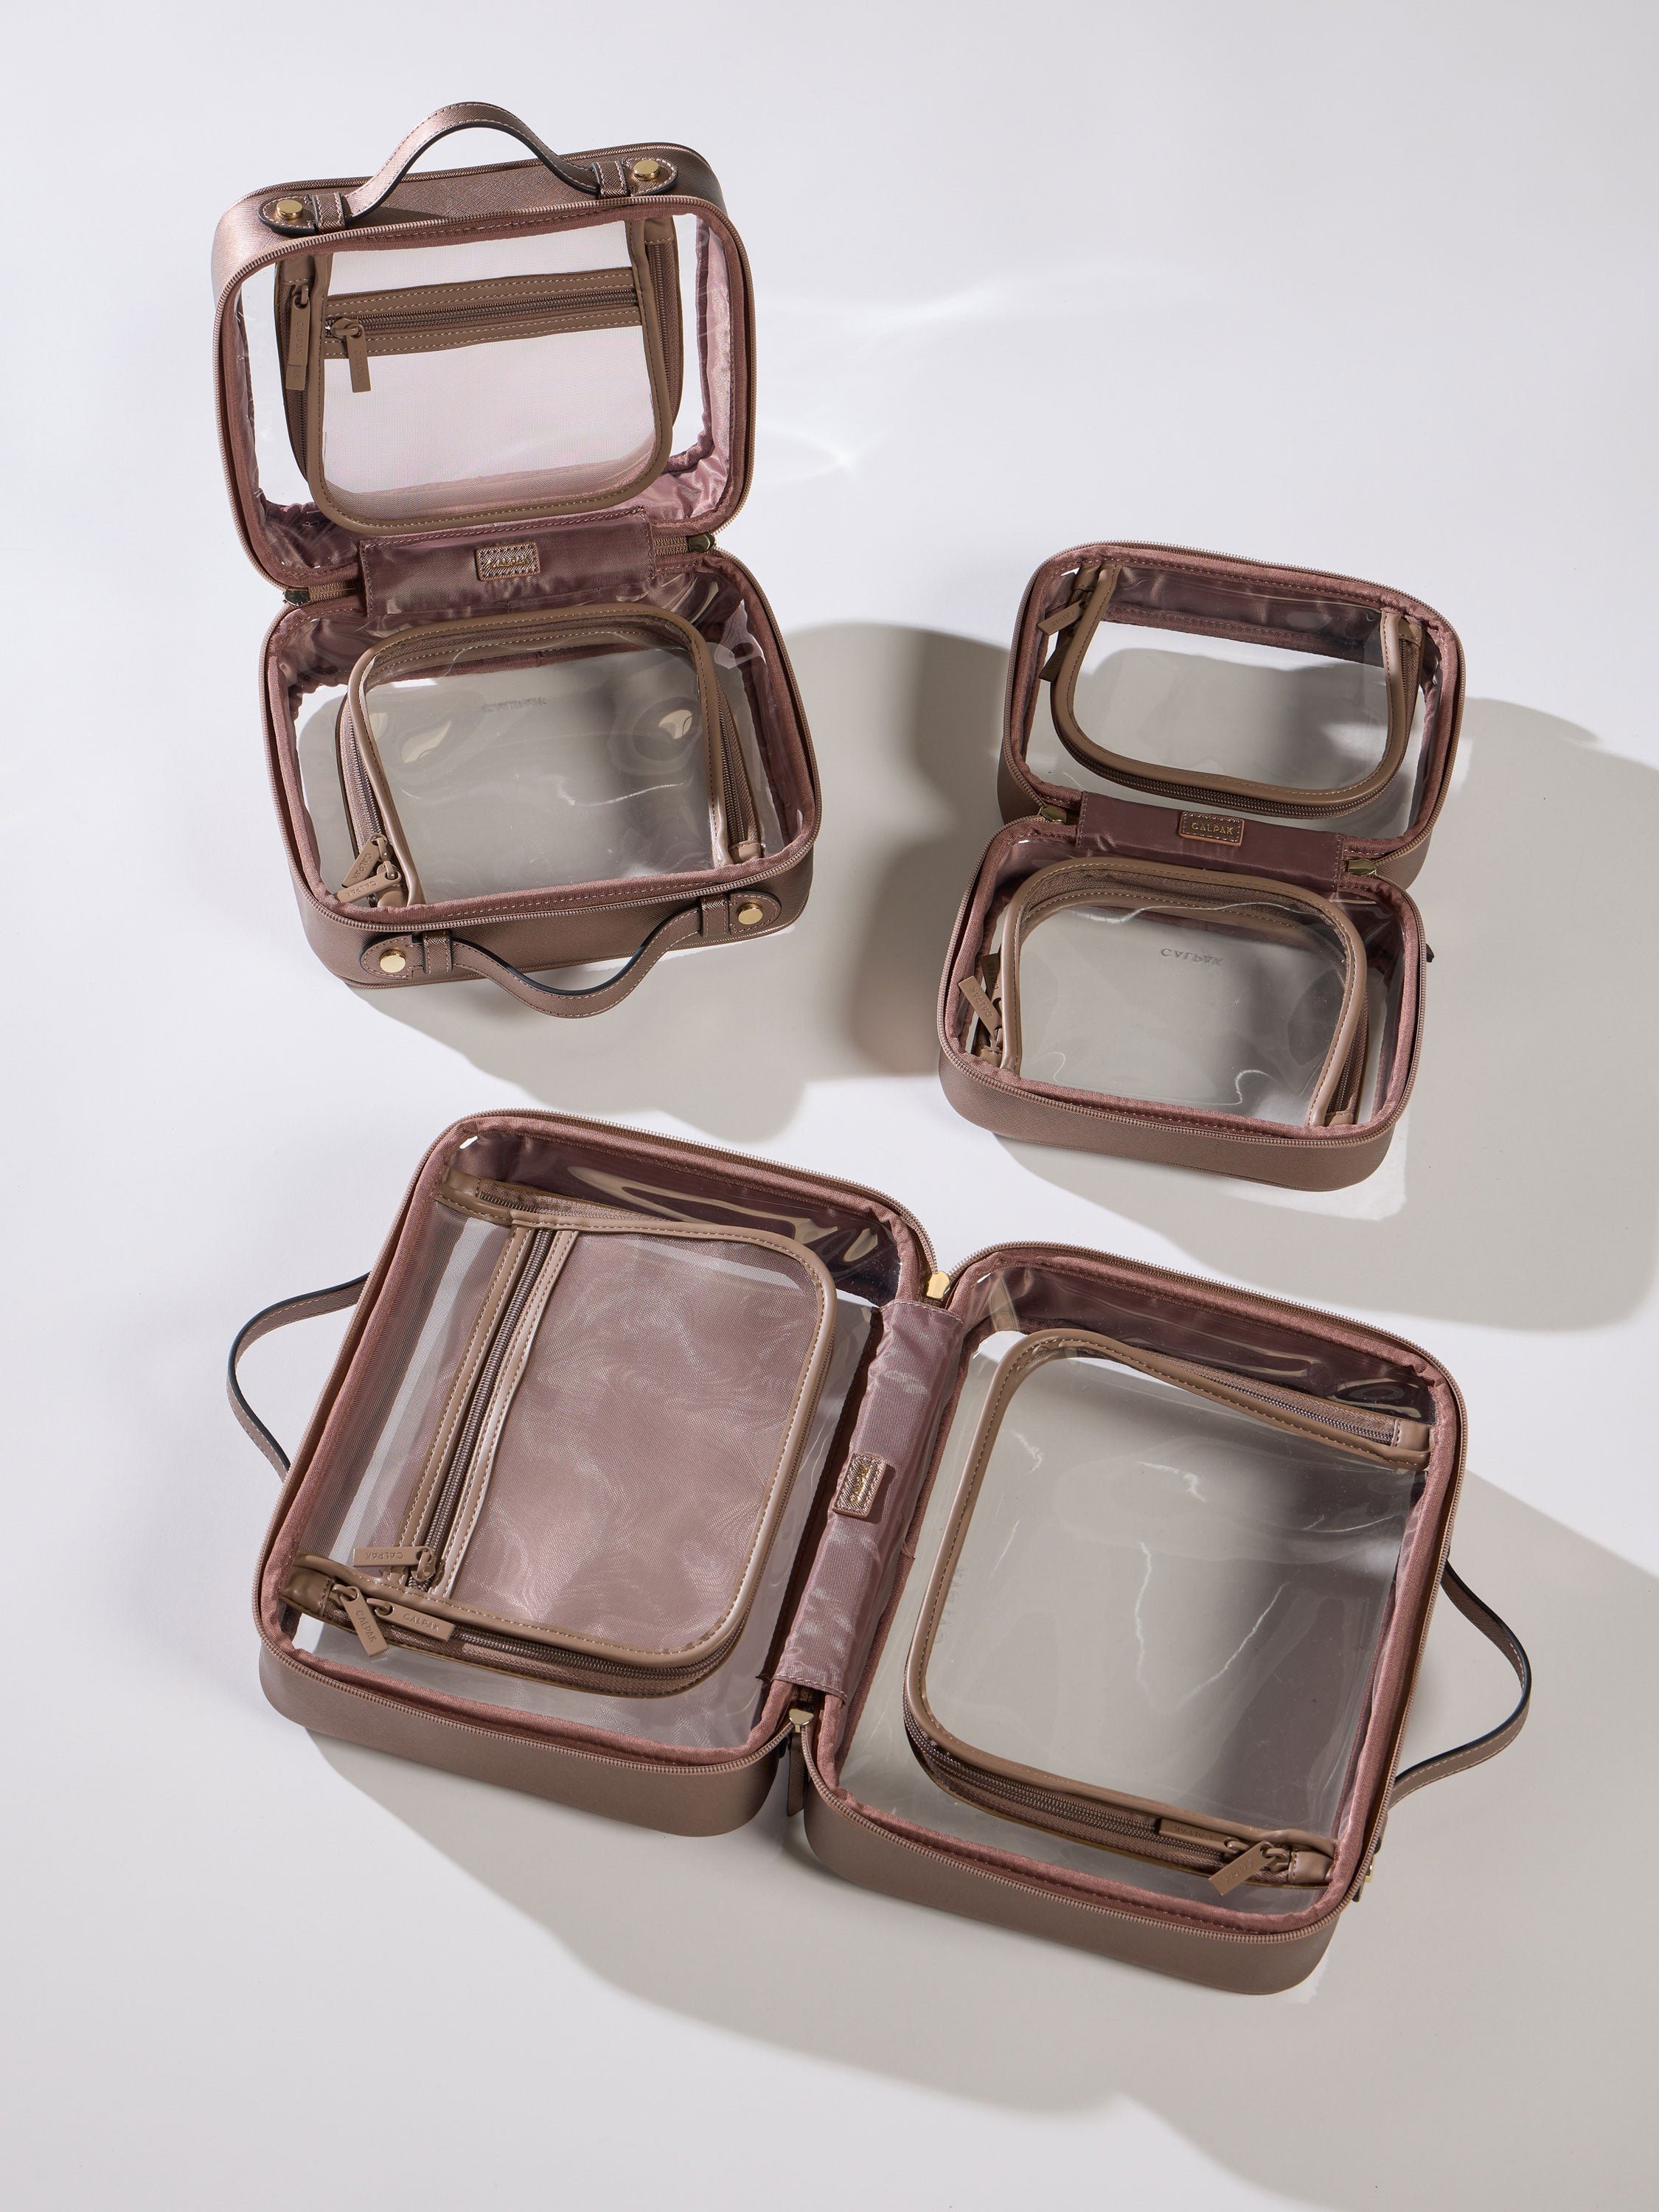 CALPAK Clear Cosmetic Cases in all size offerings in metallic bronze